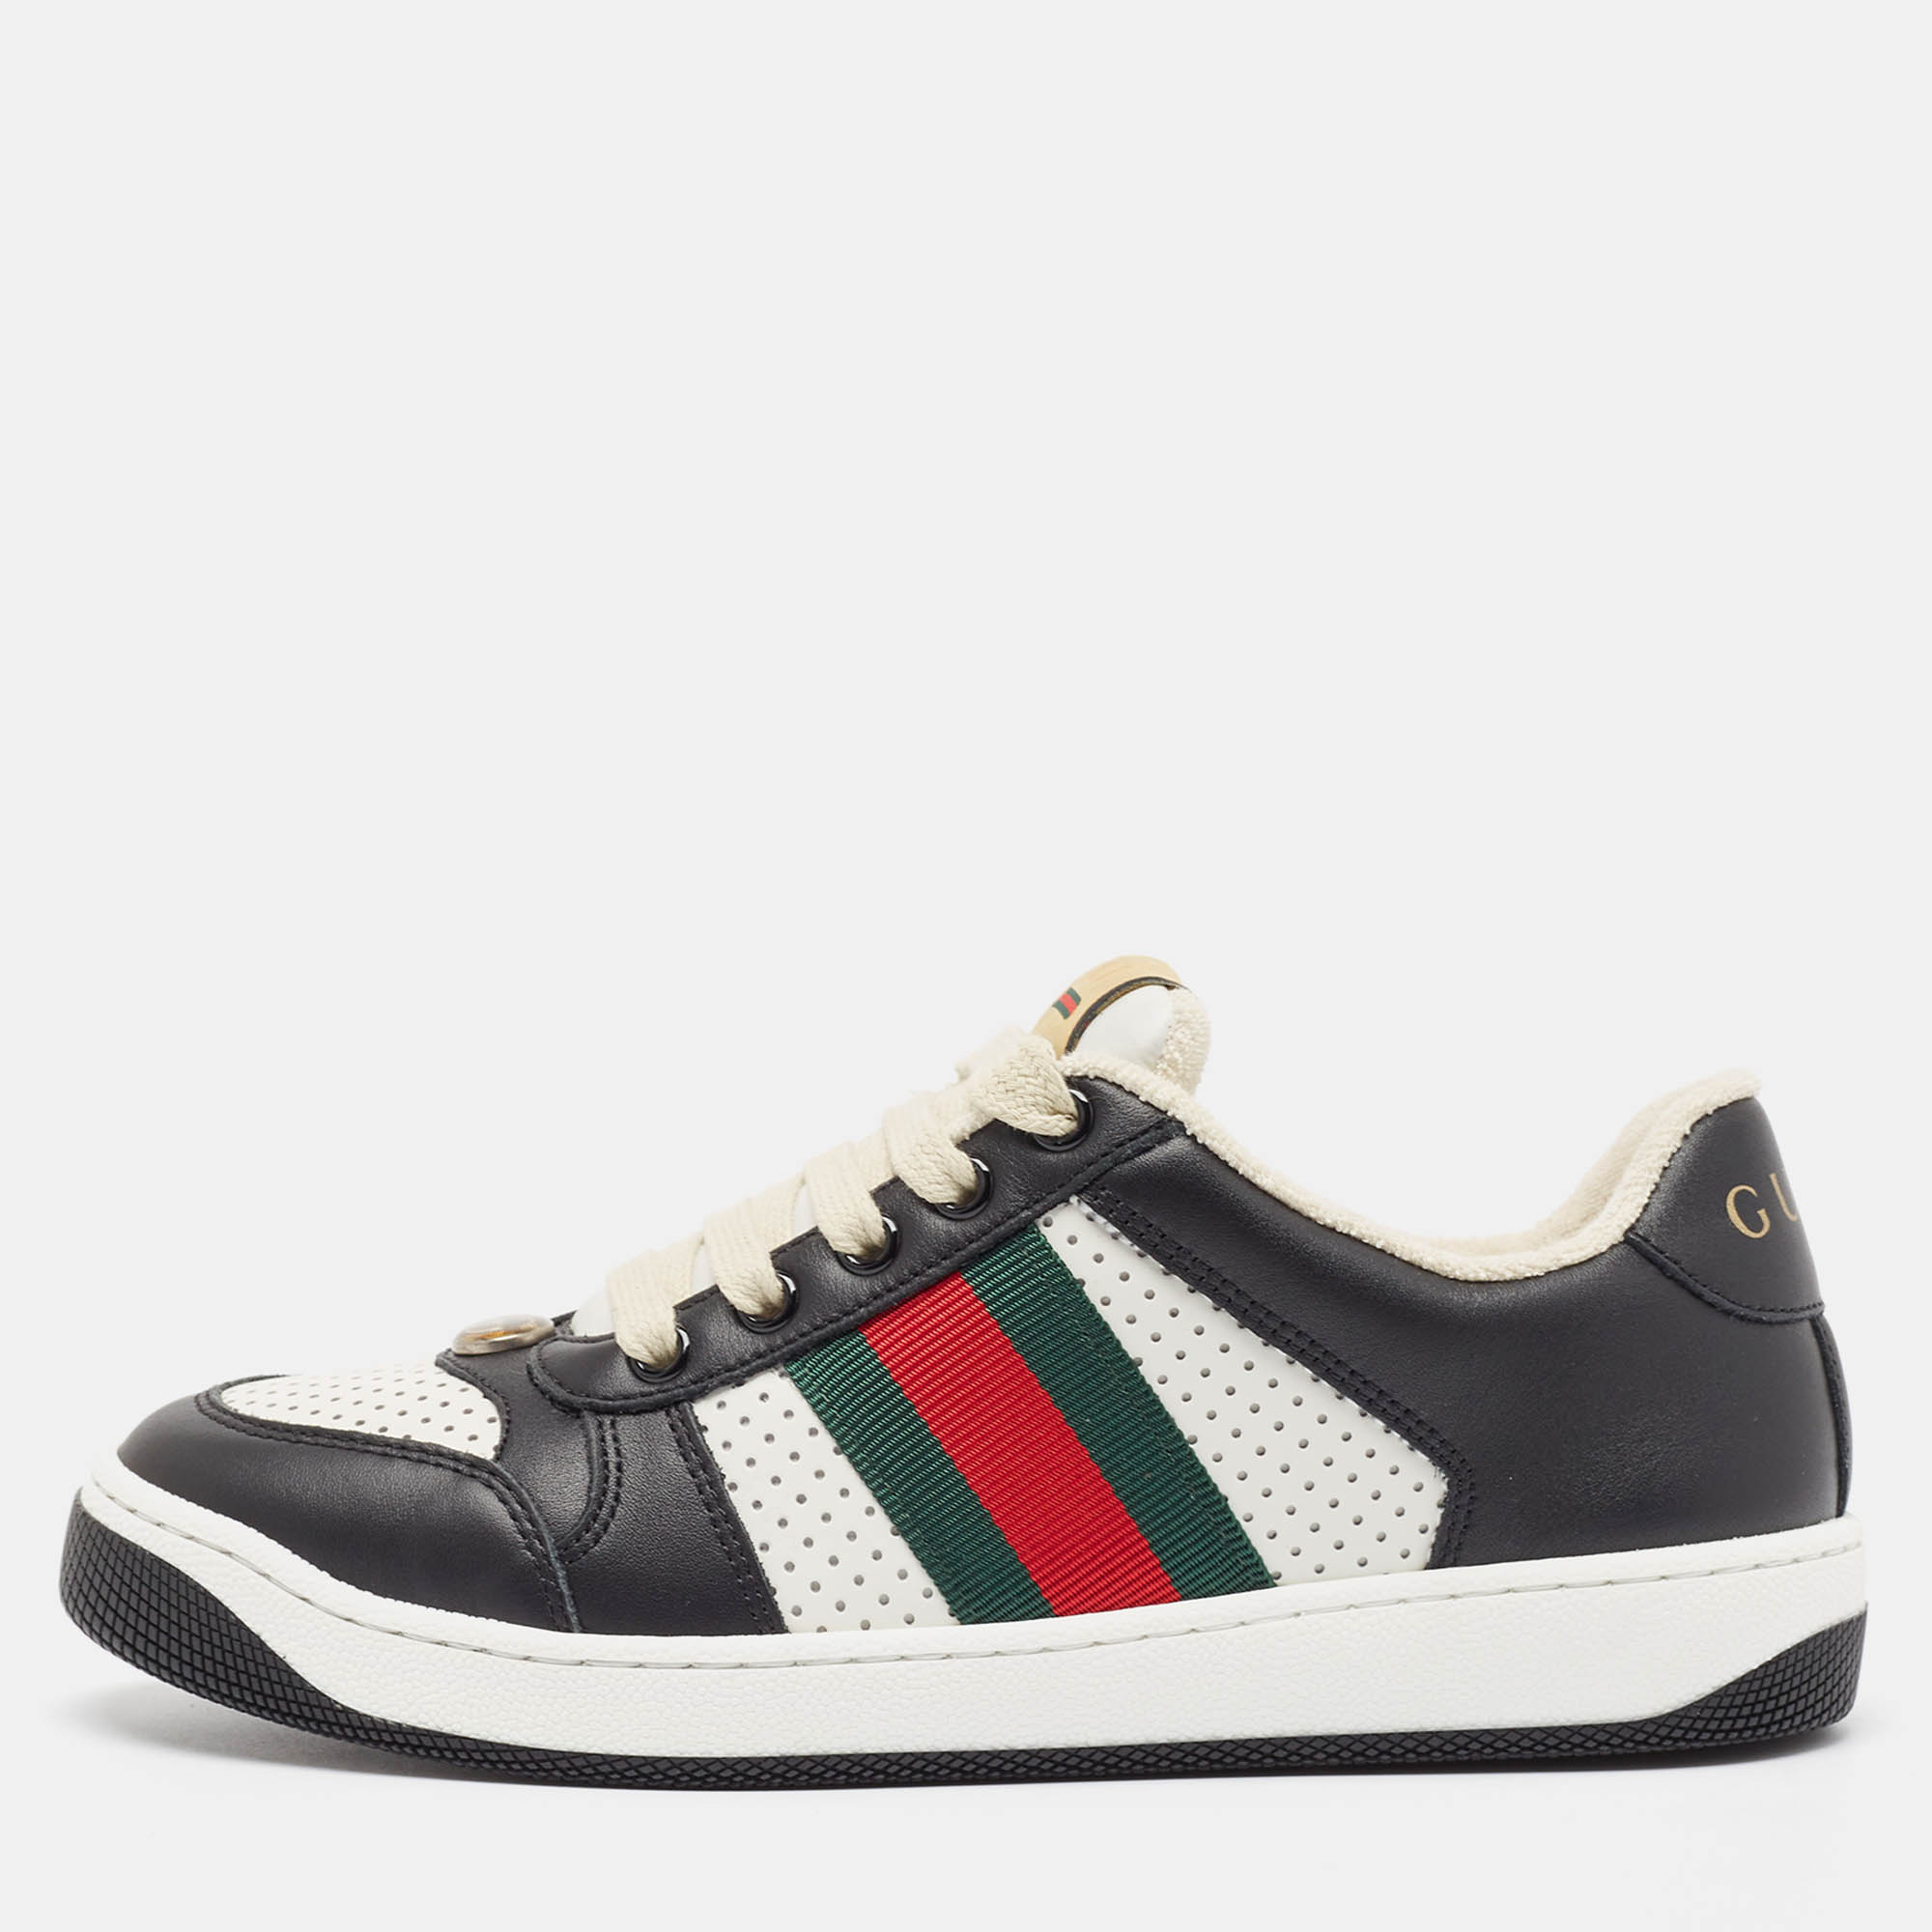 

Gucci Black/White Perforated Leather Screener Sneakers Size